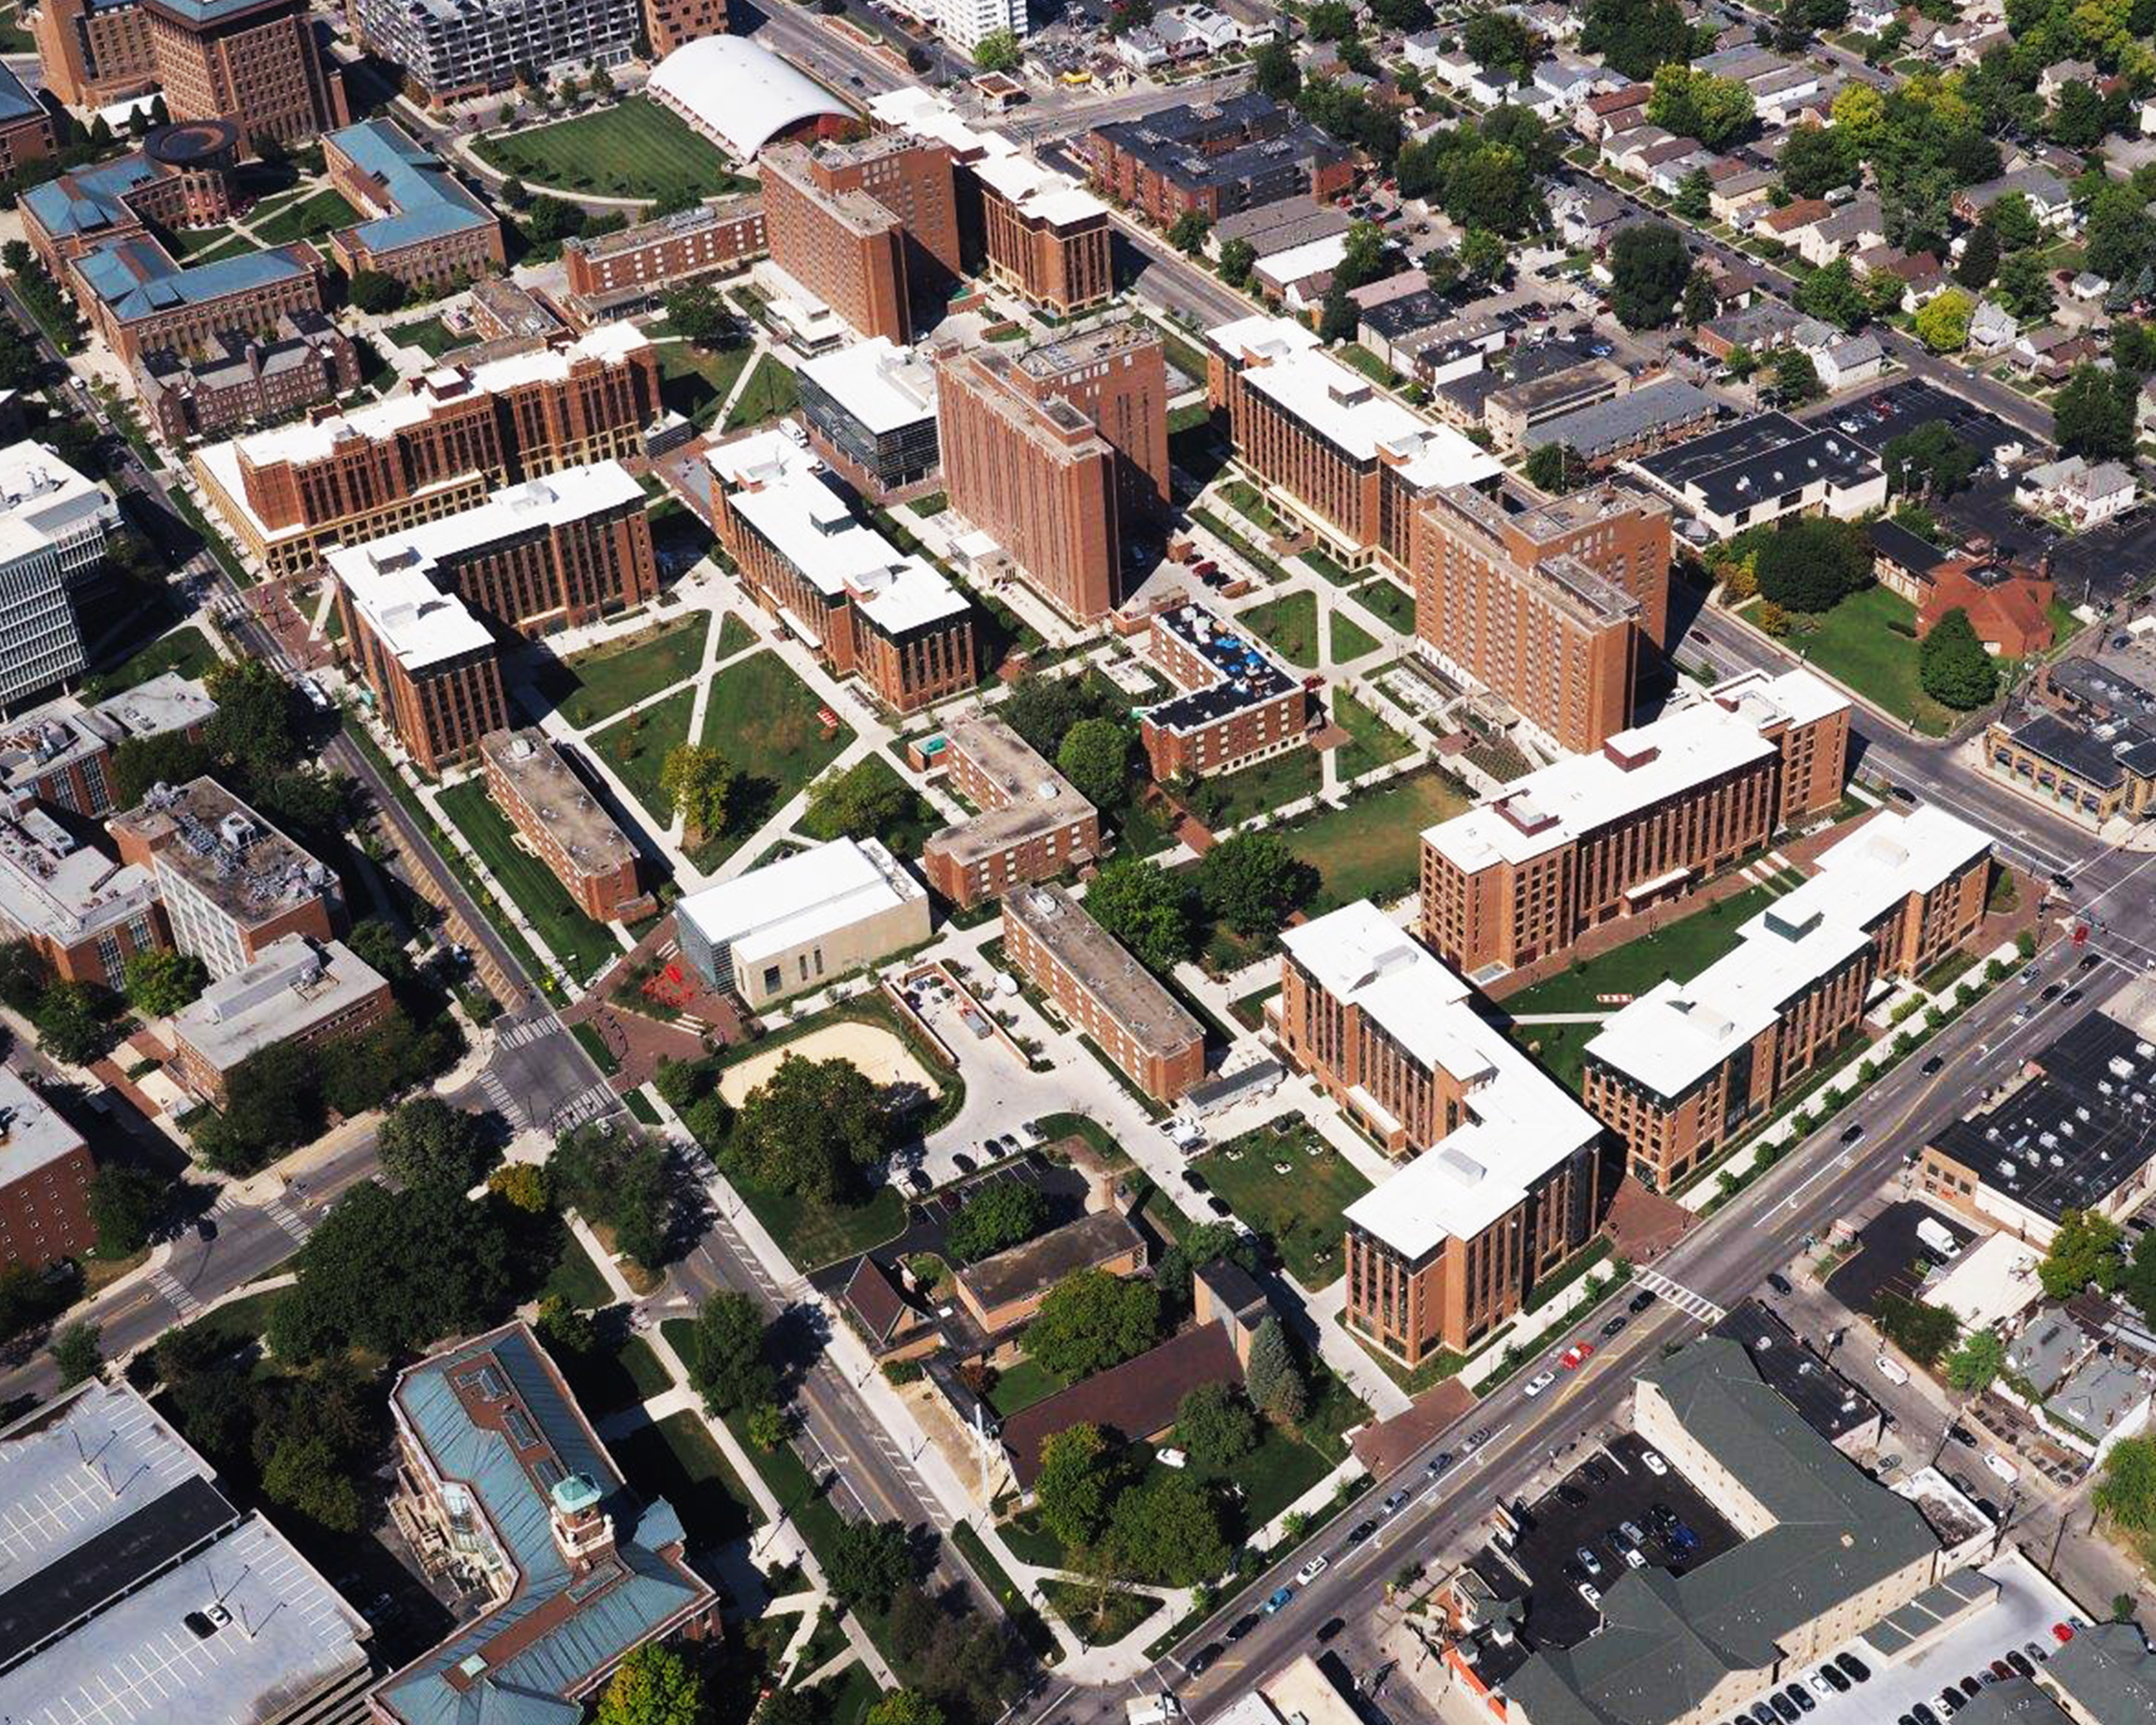 The Ohio State University North Residential District